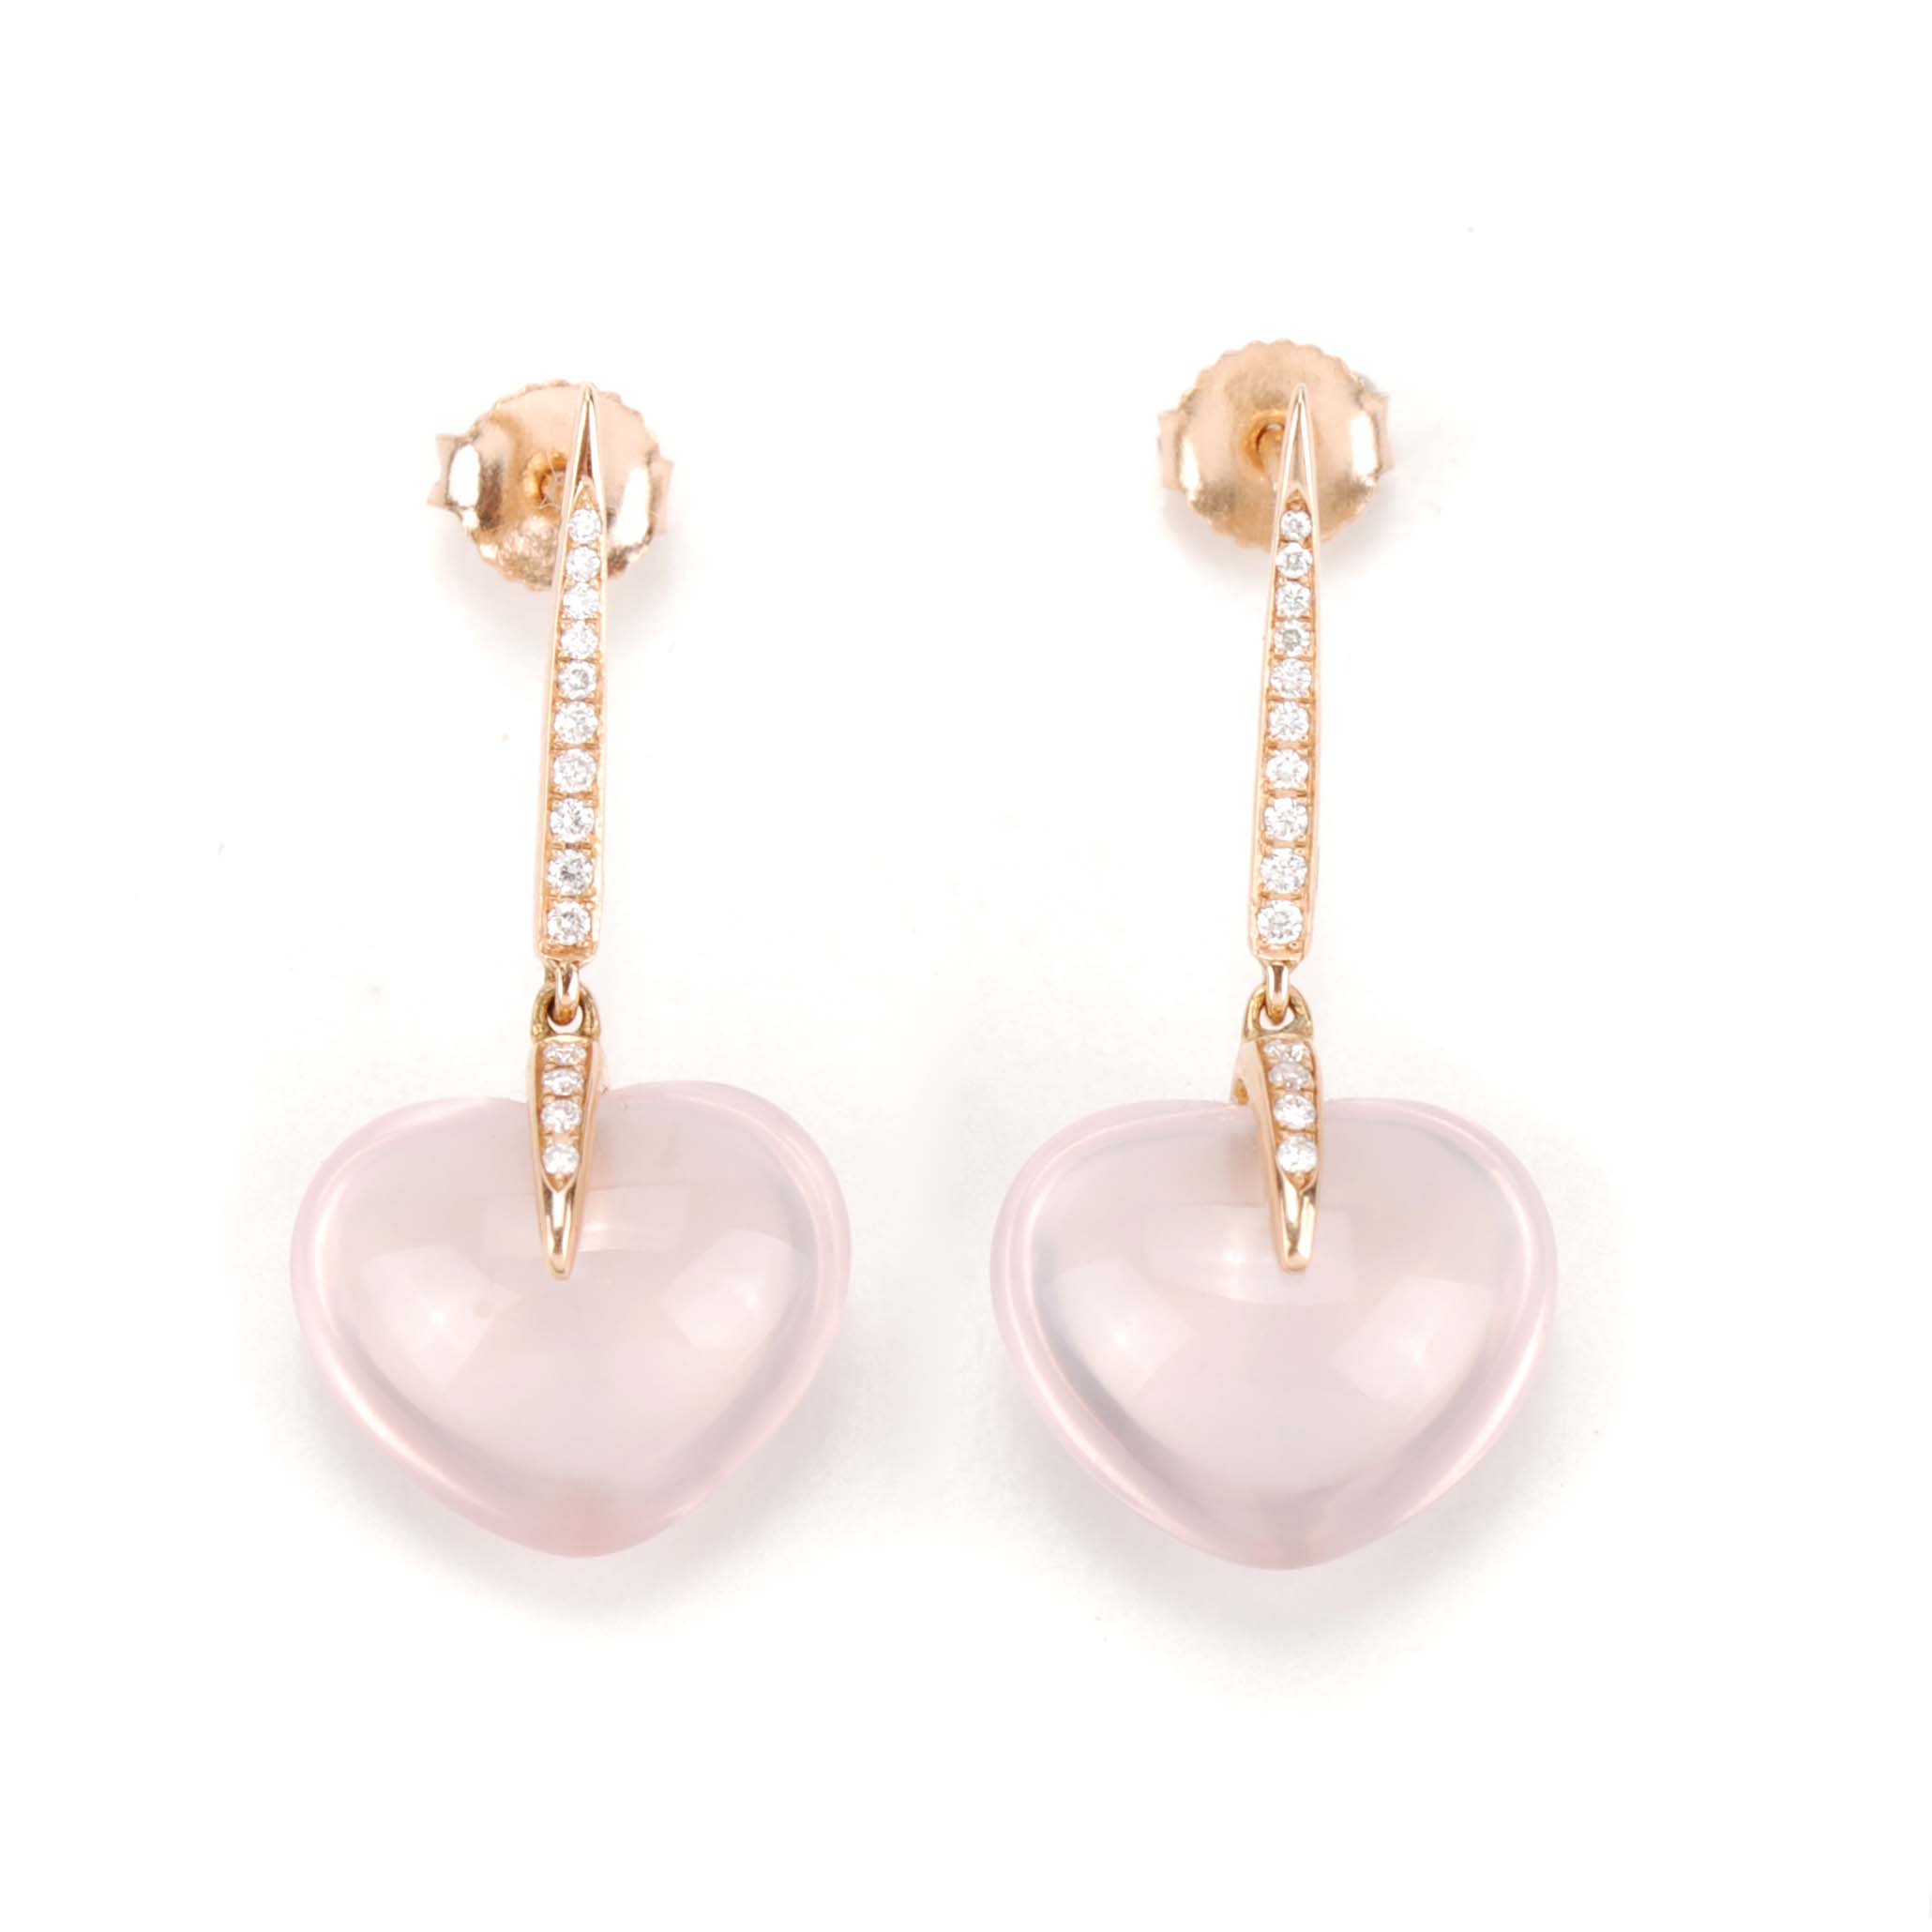 EARRINGS WITH DIAMONDS AND ROSE QUARTZ.